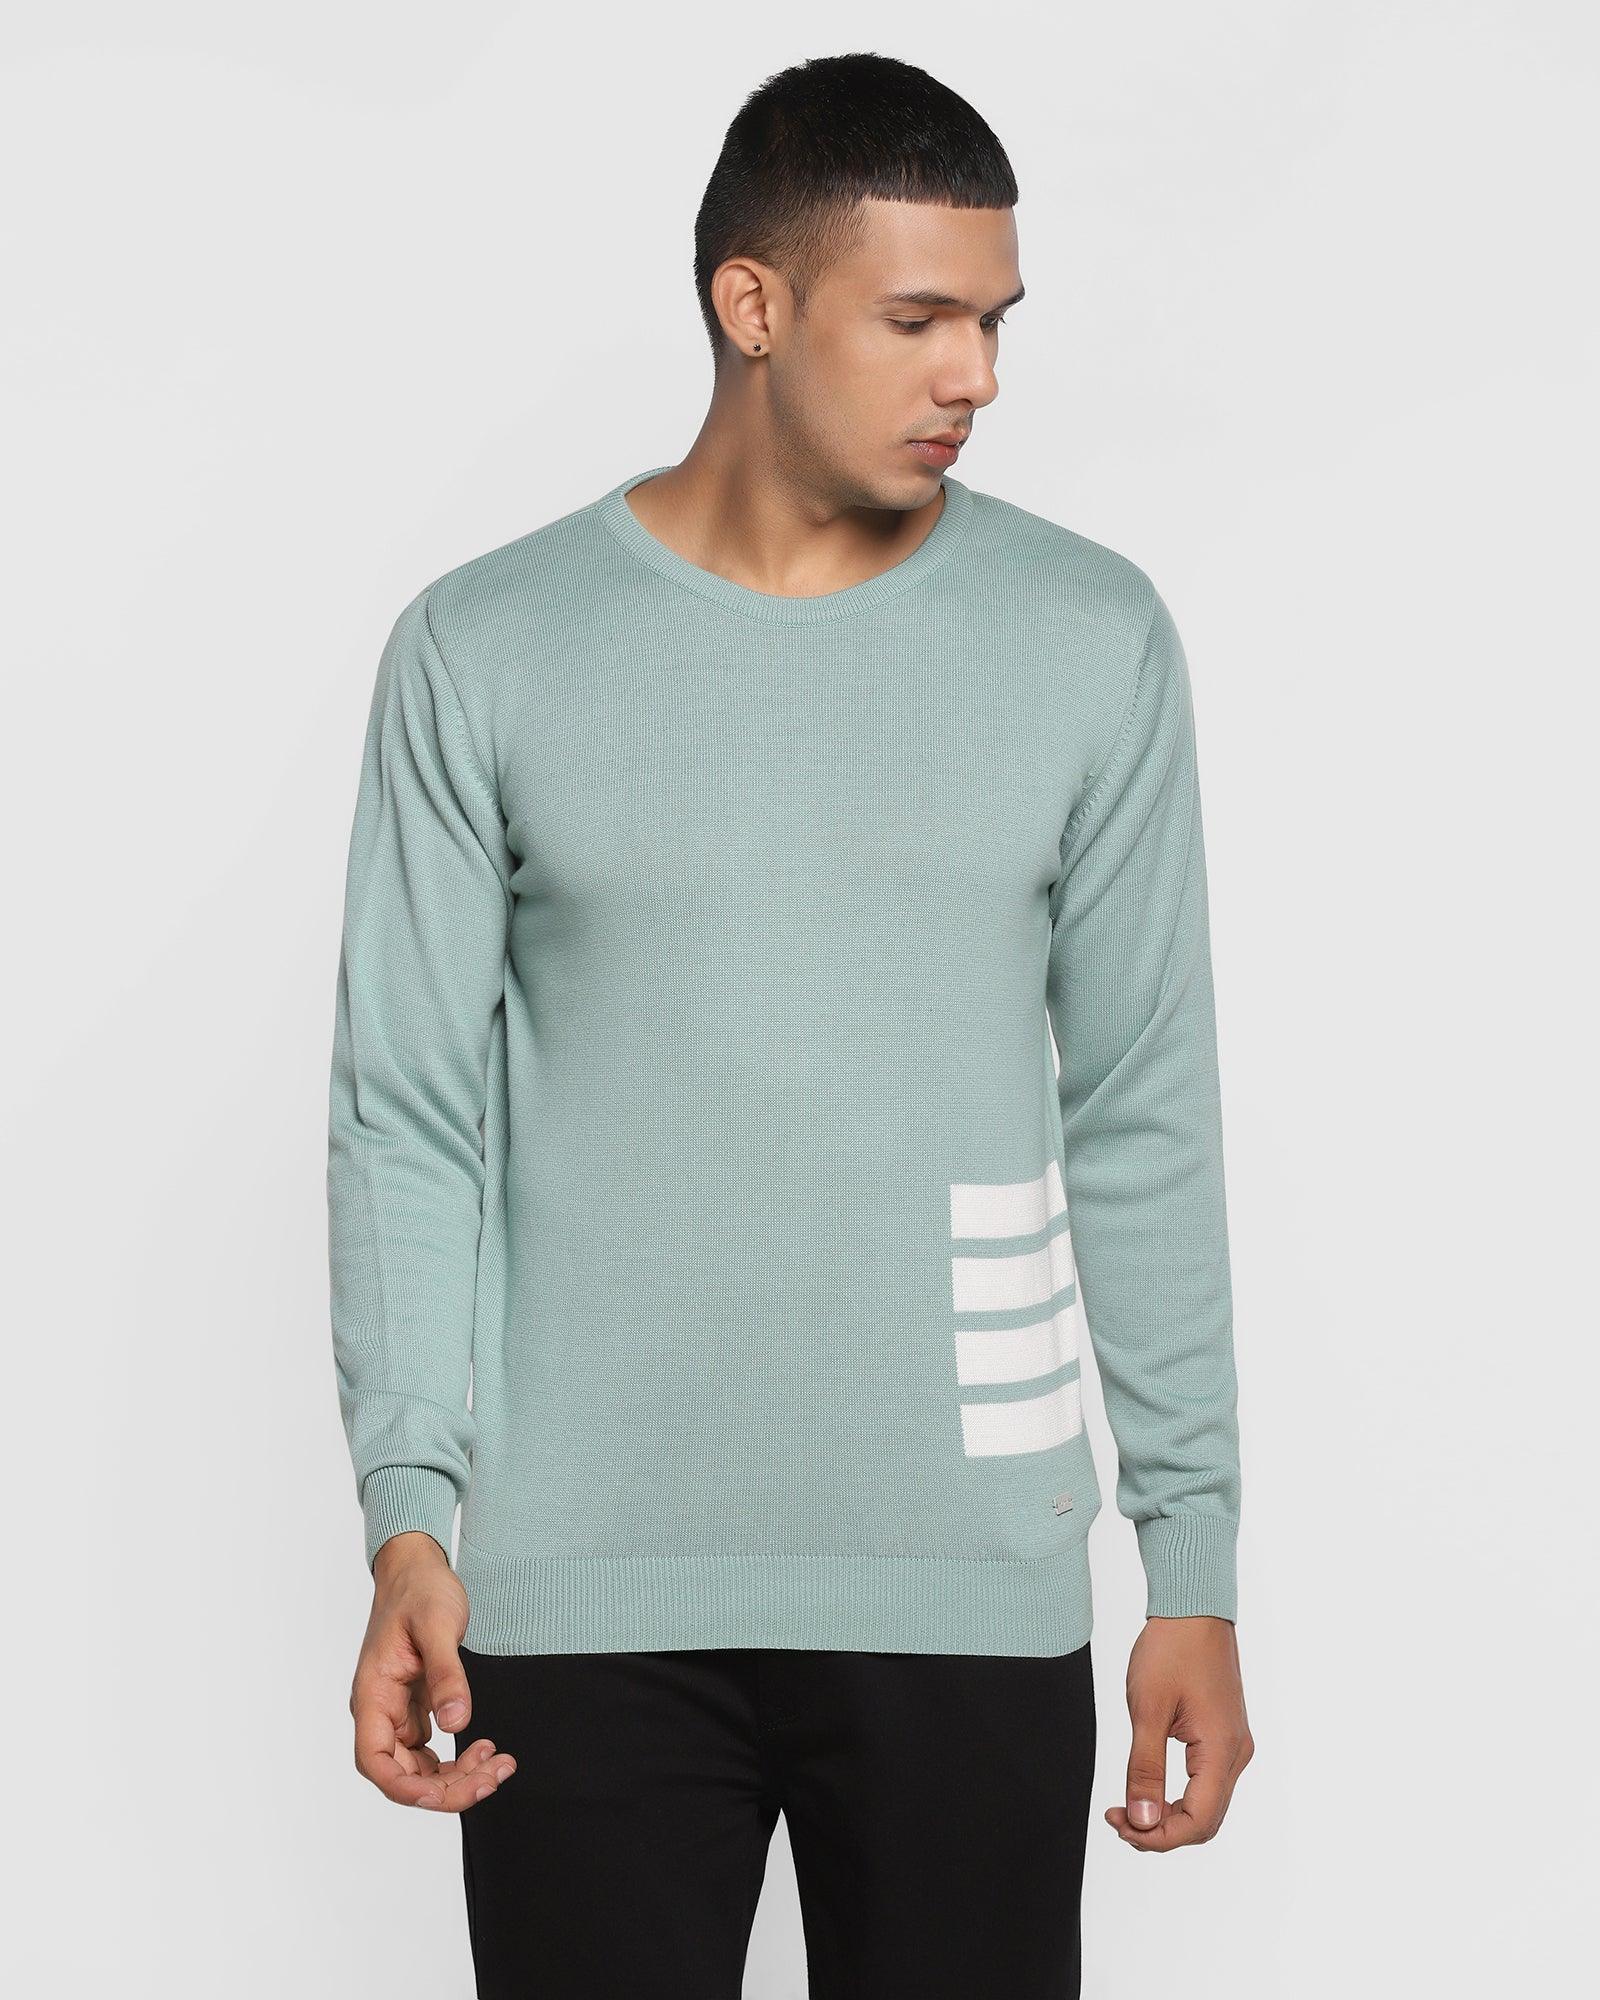 Crew Neck Pistachio Green Solid Sweater - Riddle